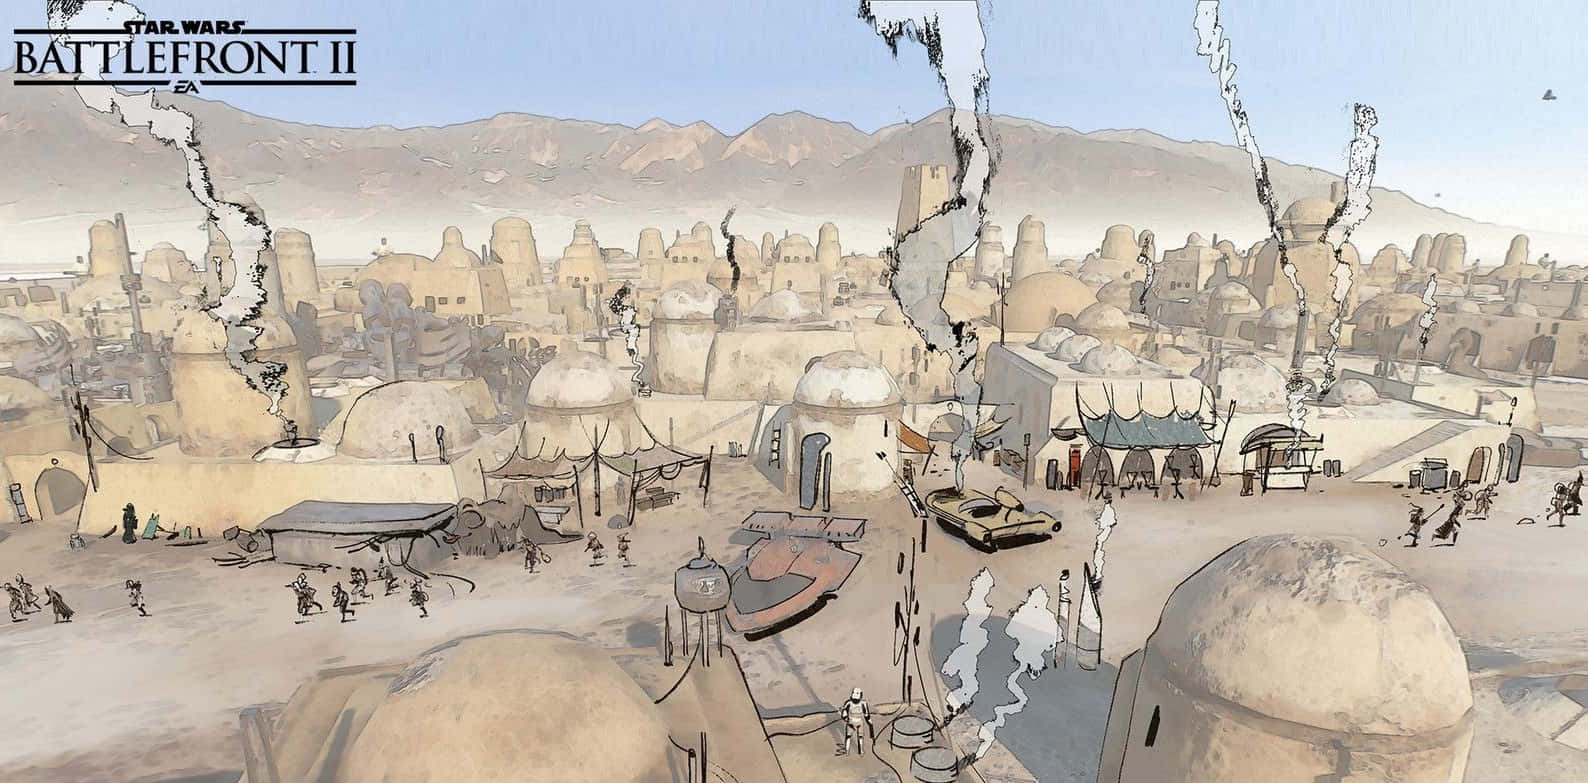 The spaceport known as Mos Eisley, a hive of criminal activity and home to unsavoury denizens Wallpaper